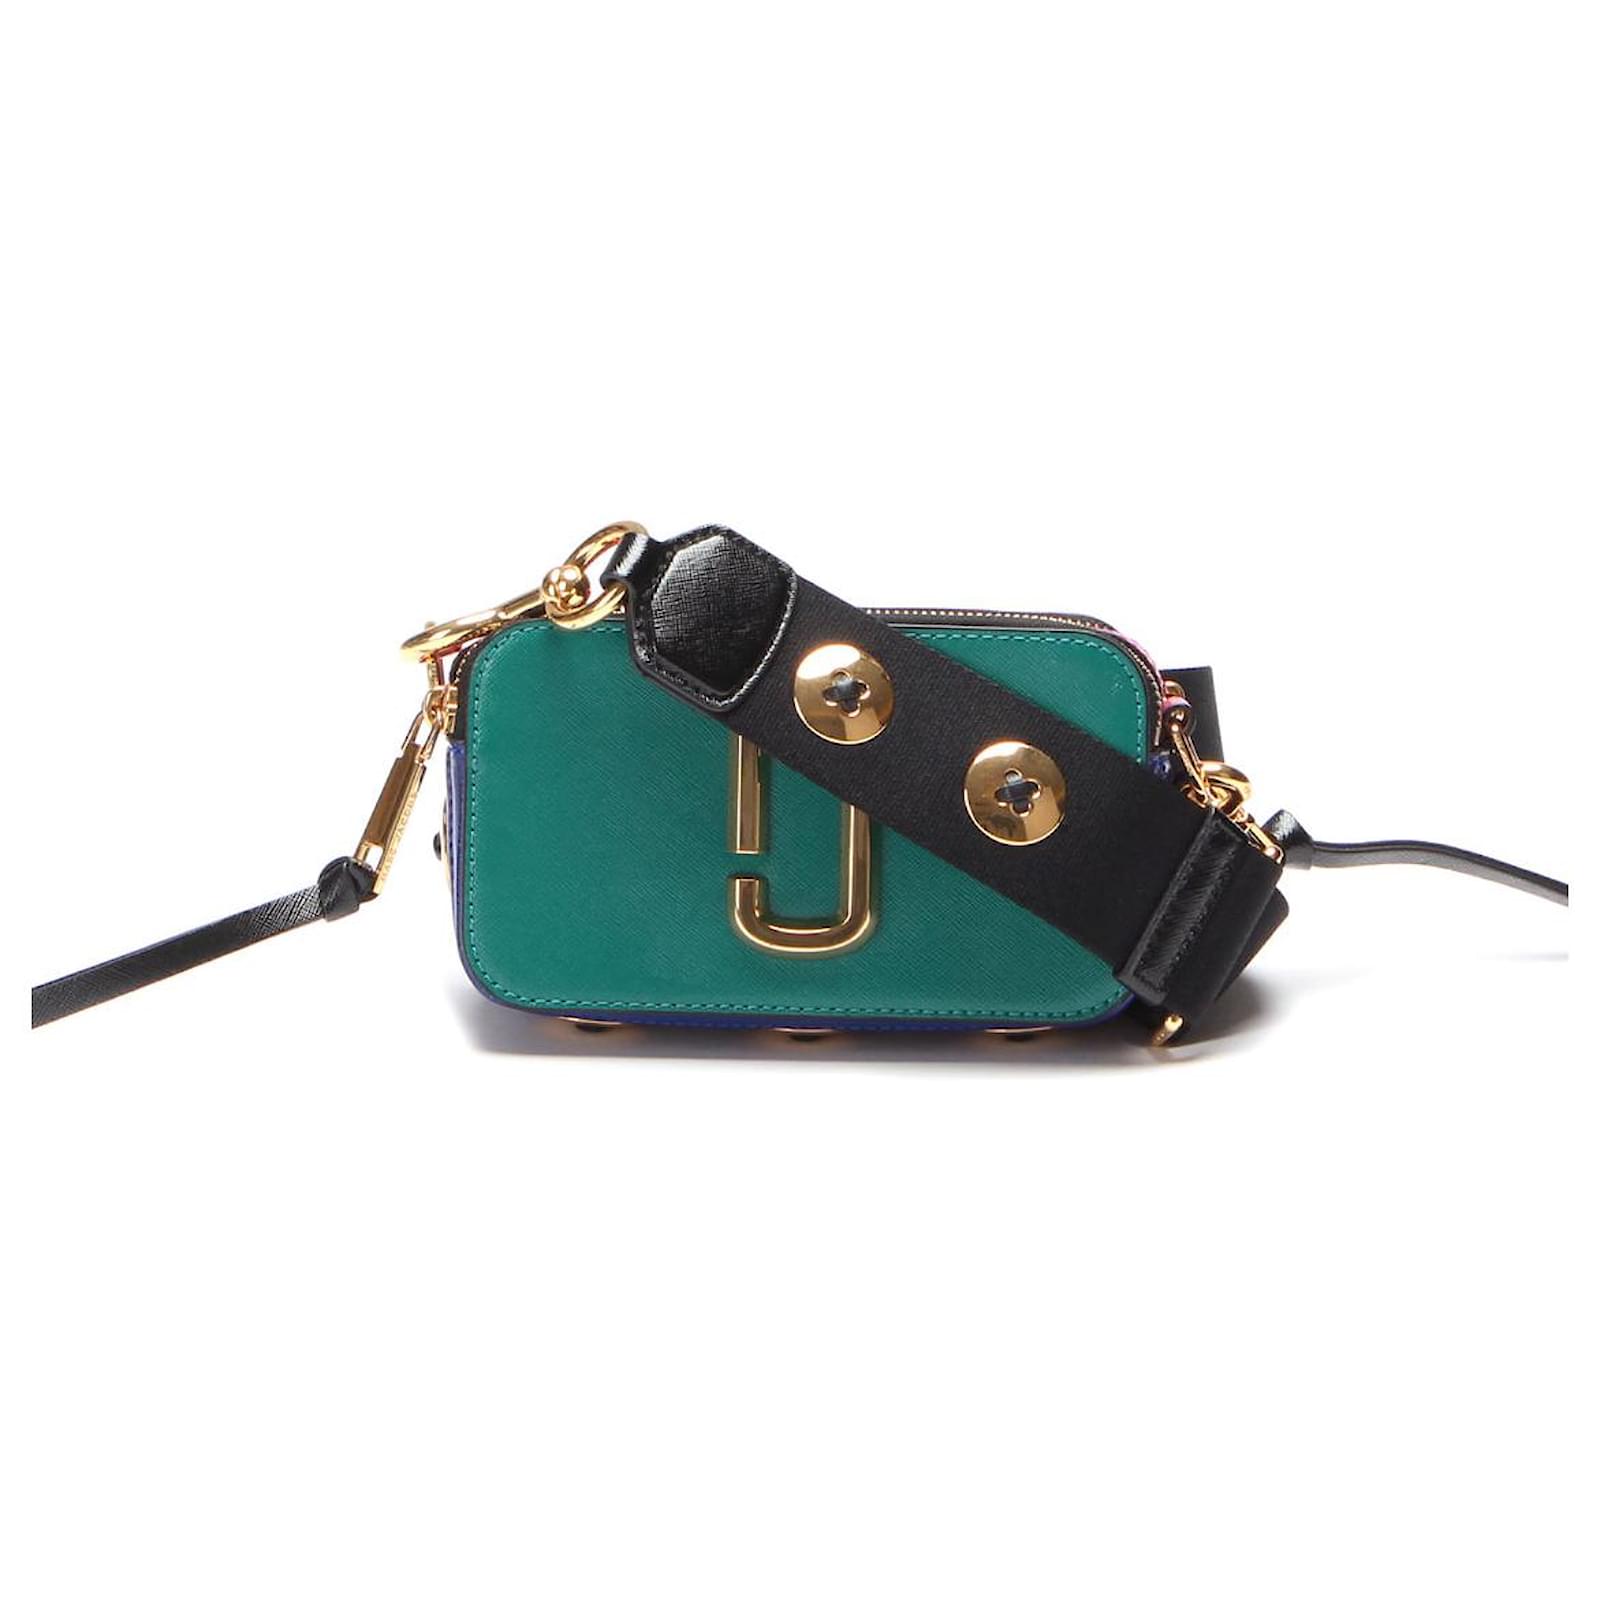 The Marc Jacobs Green Camera Bag